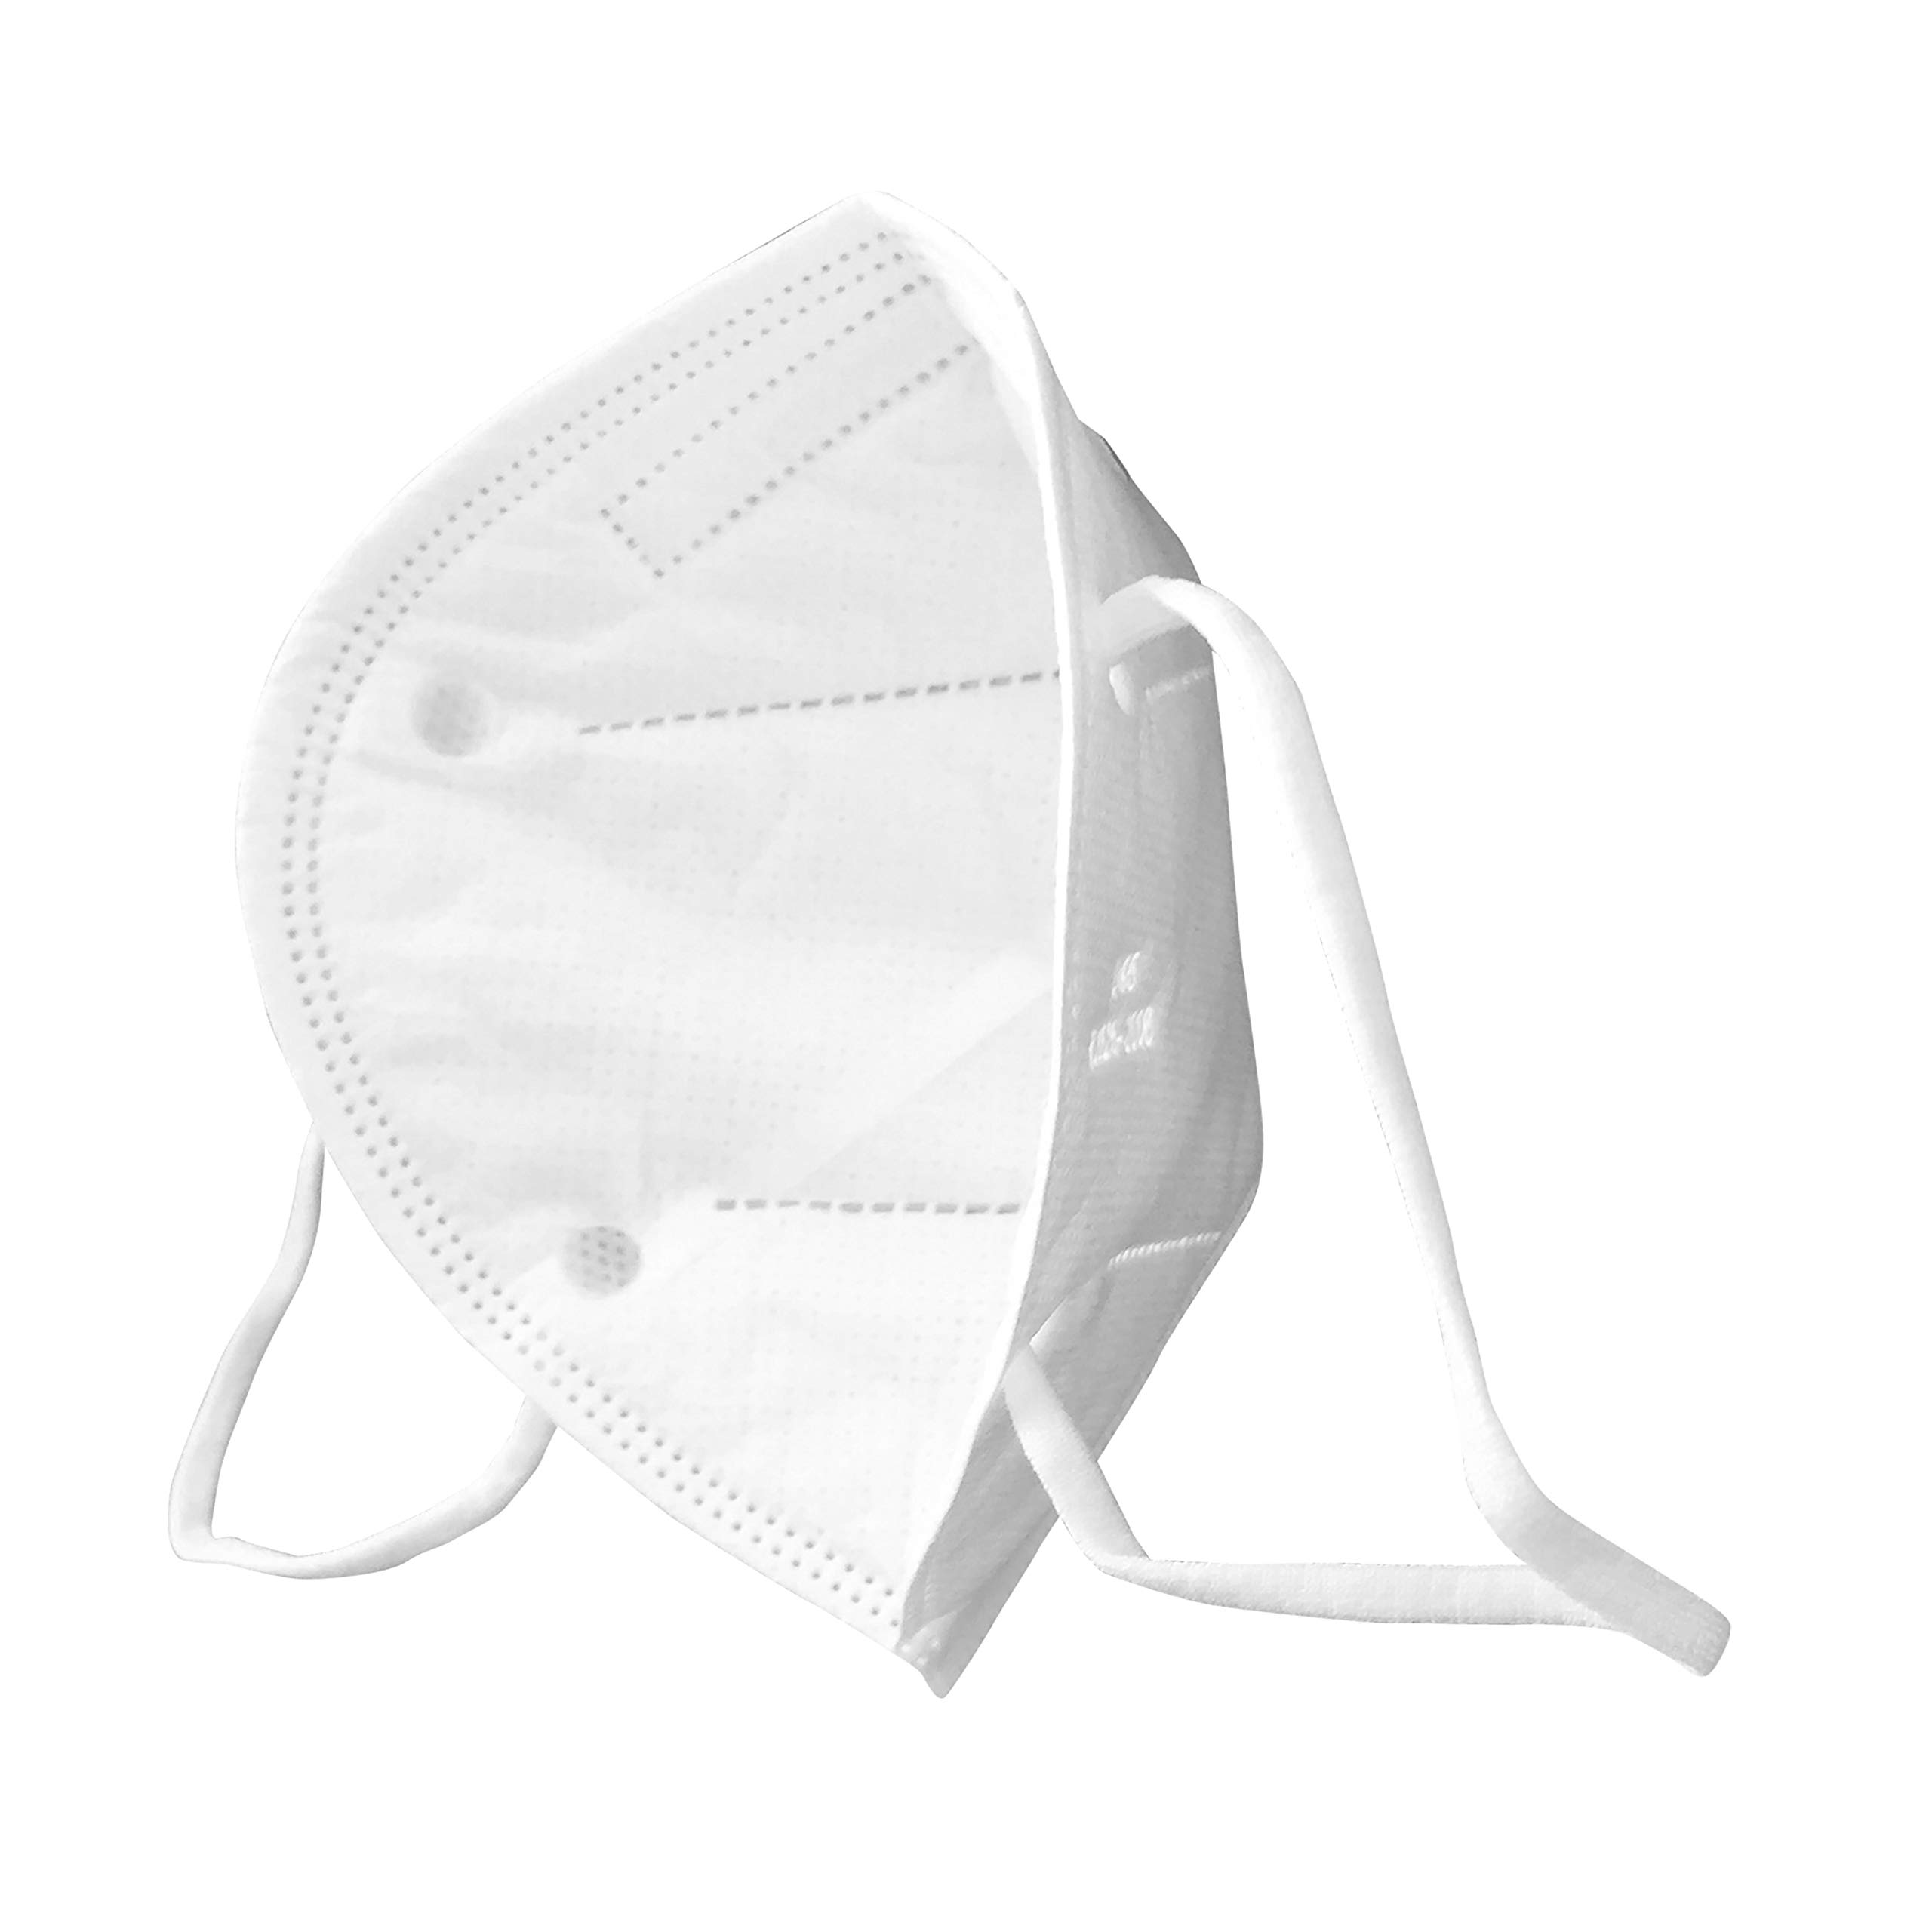 SupplyAID RRS-KN95-5PK KN95 Face Mask for Protection Against PM2.5 Dust, Pollen and Haze-Proof, 5 Pack, White